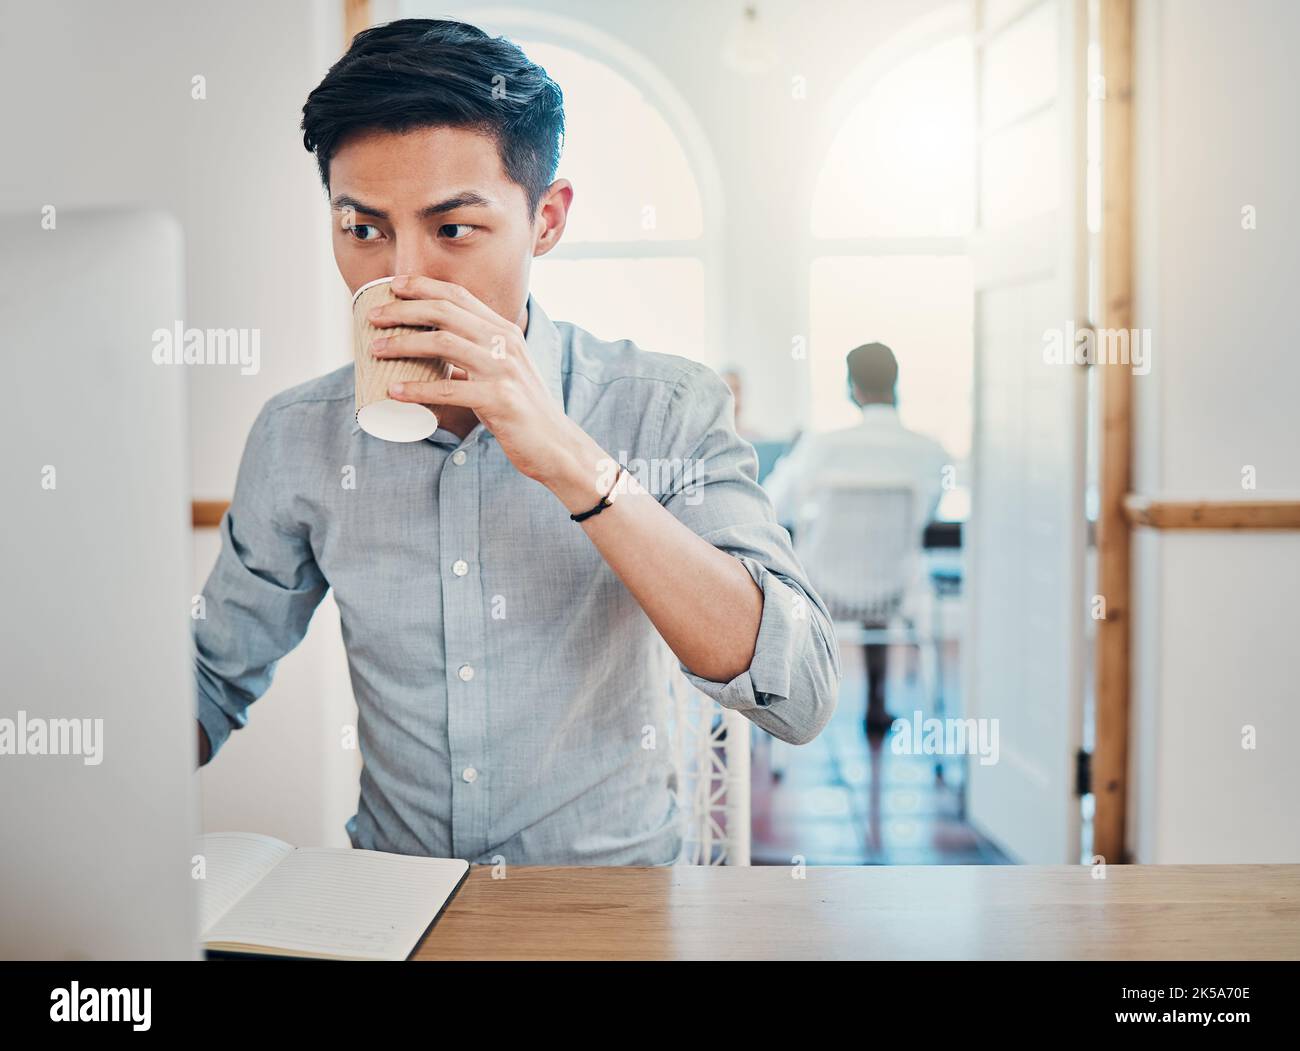 Coffee, computer and notebook with a business man thinking while working at his office desk. Idea, email and report with a male asian employee at work Stock Photo